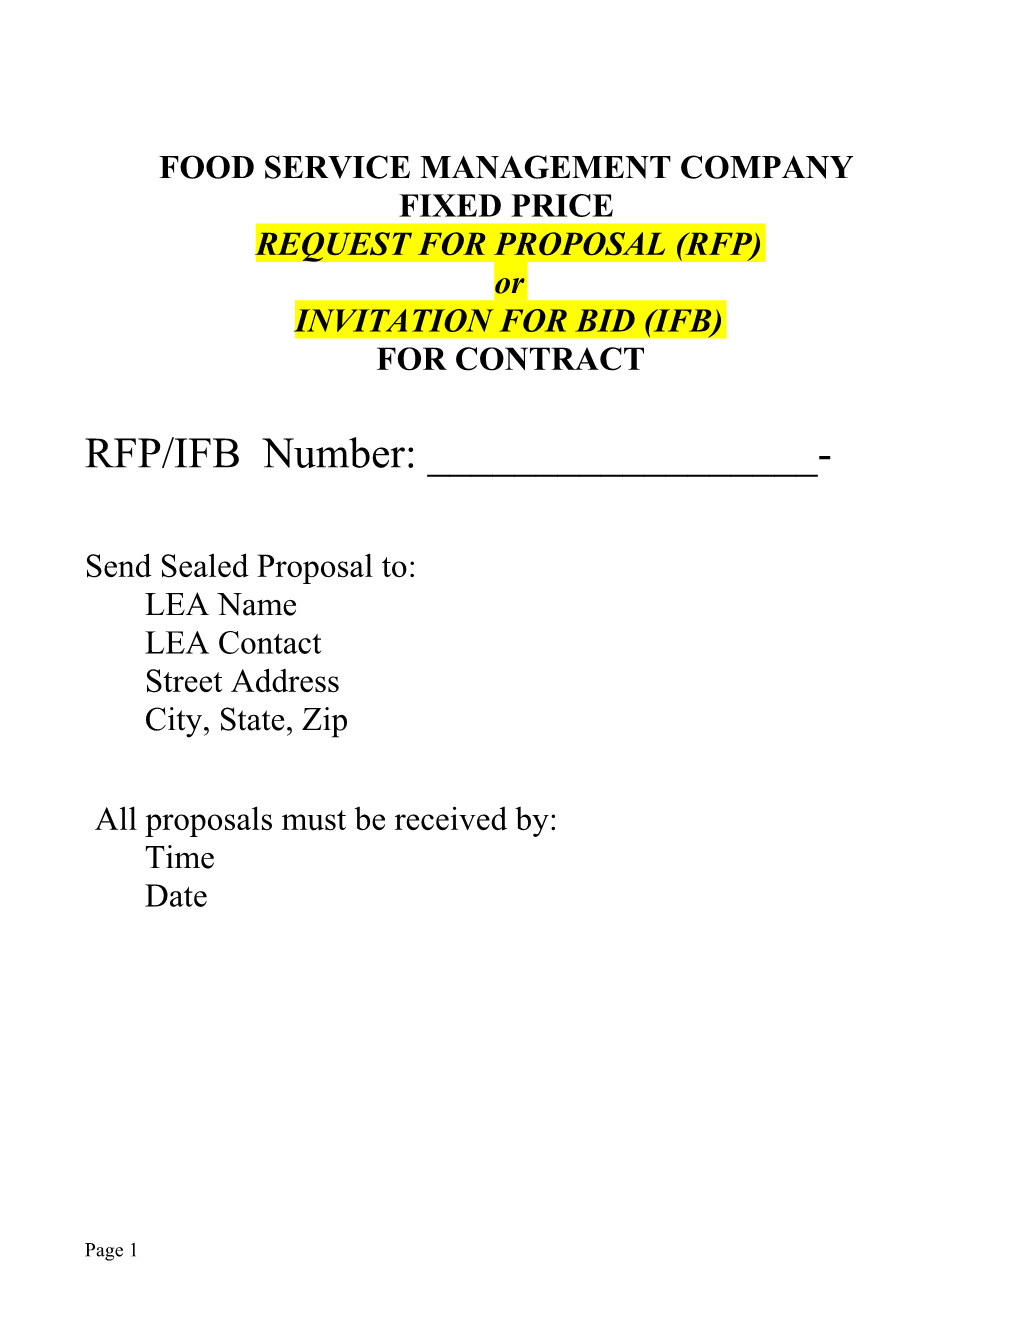 Food Service Management Company s1